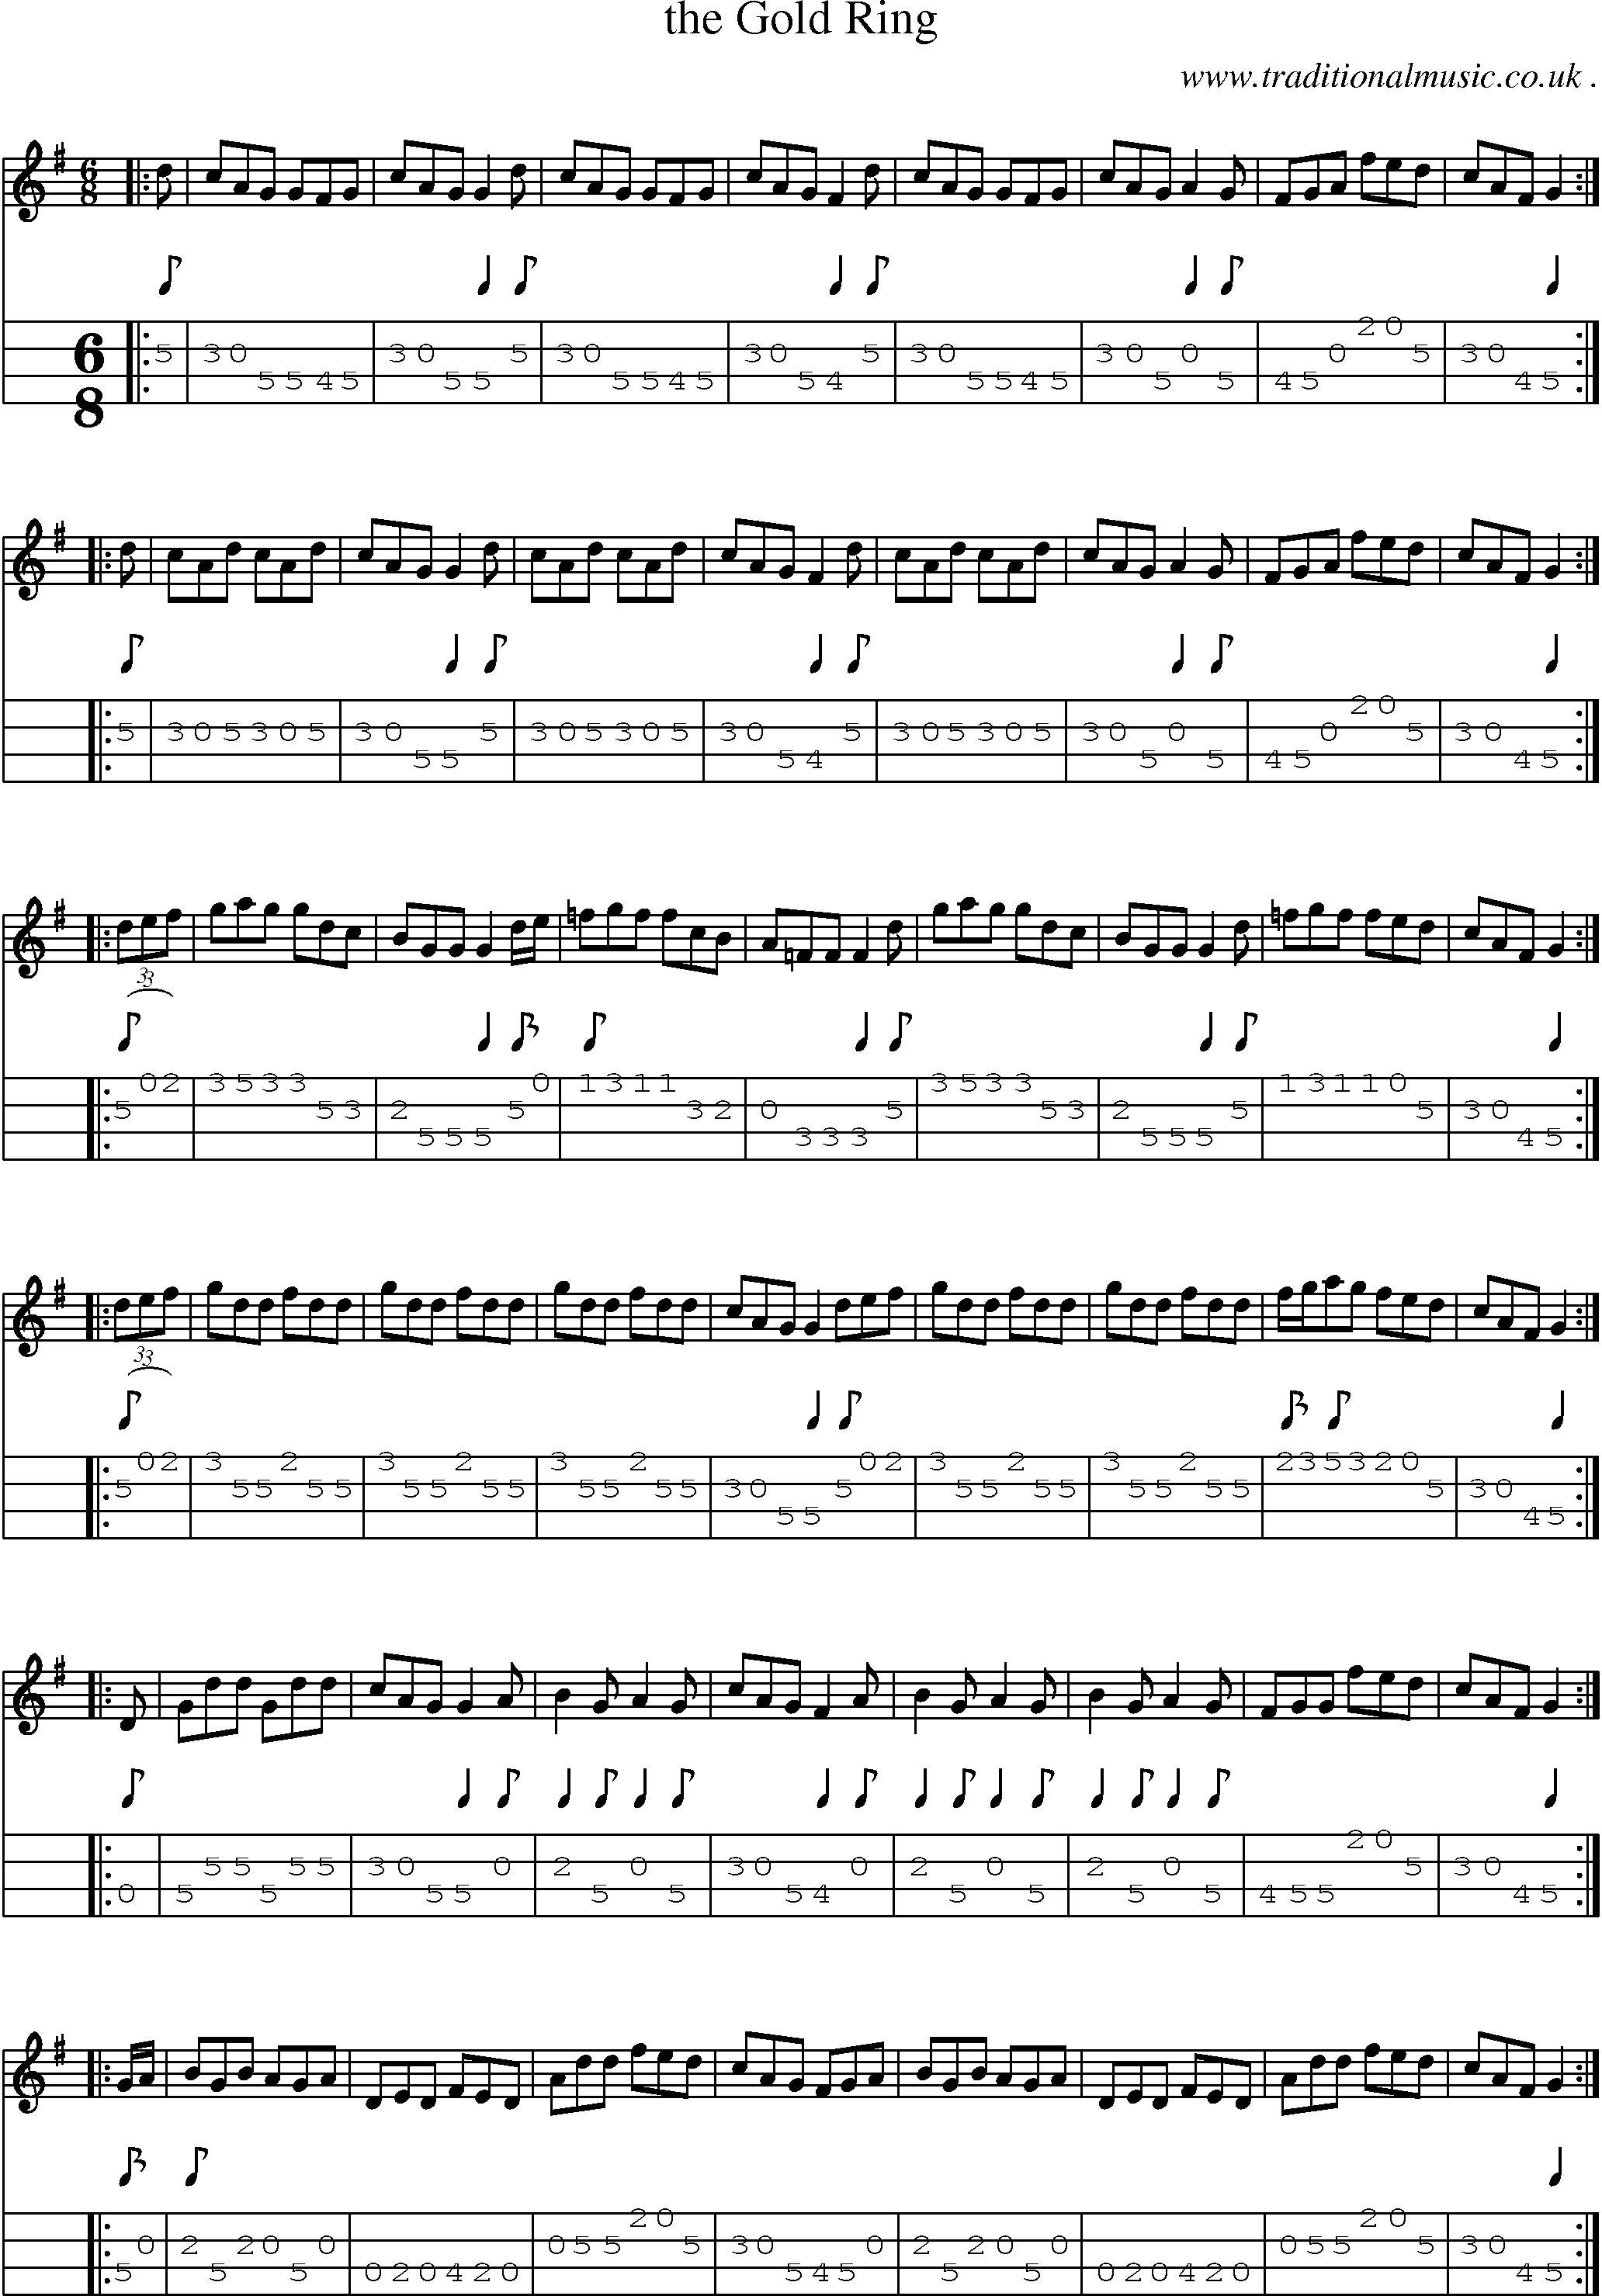 Sheet-music  score, Chords and Mandolin Tabs for The Gold Ring